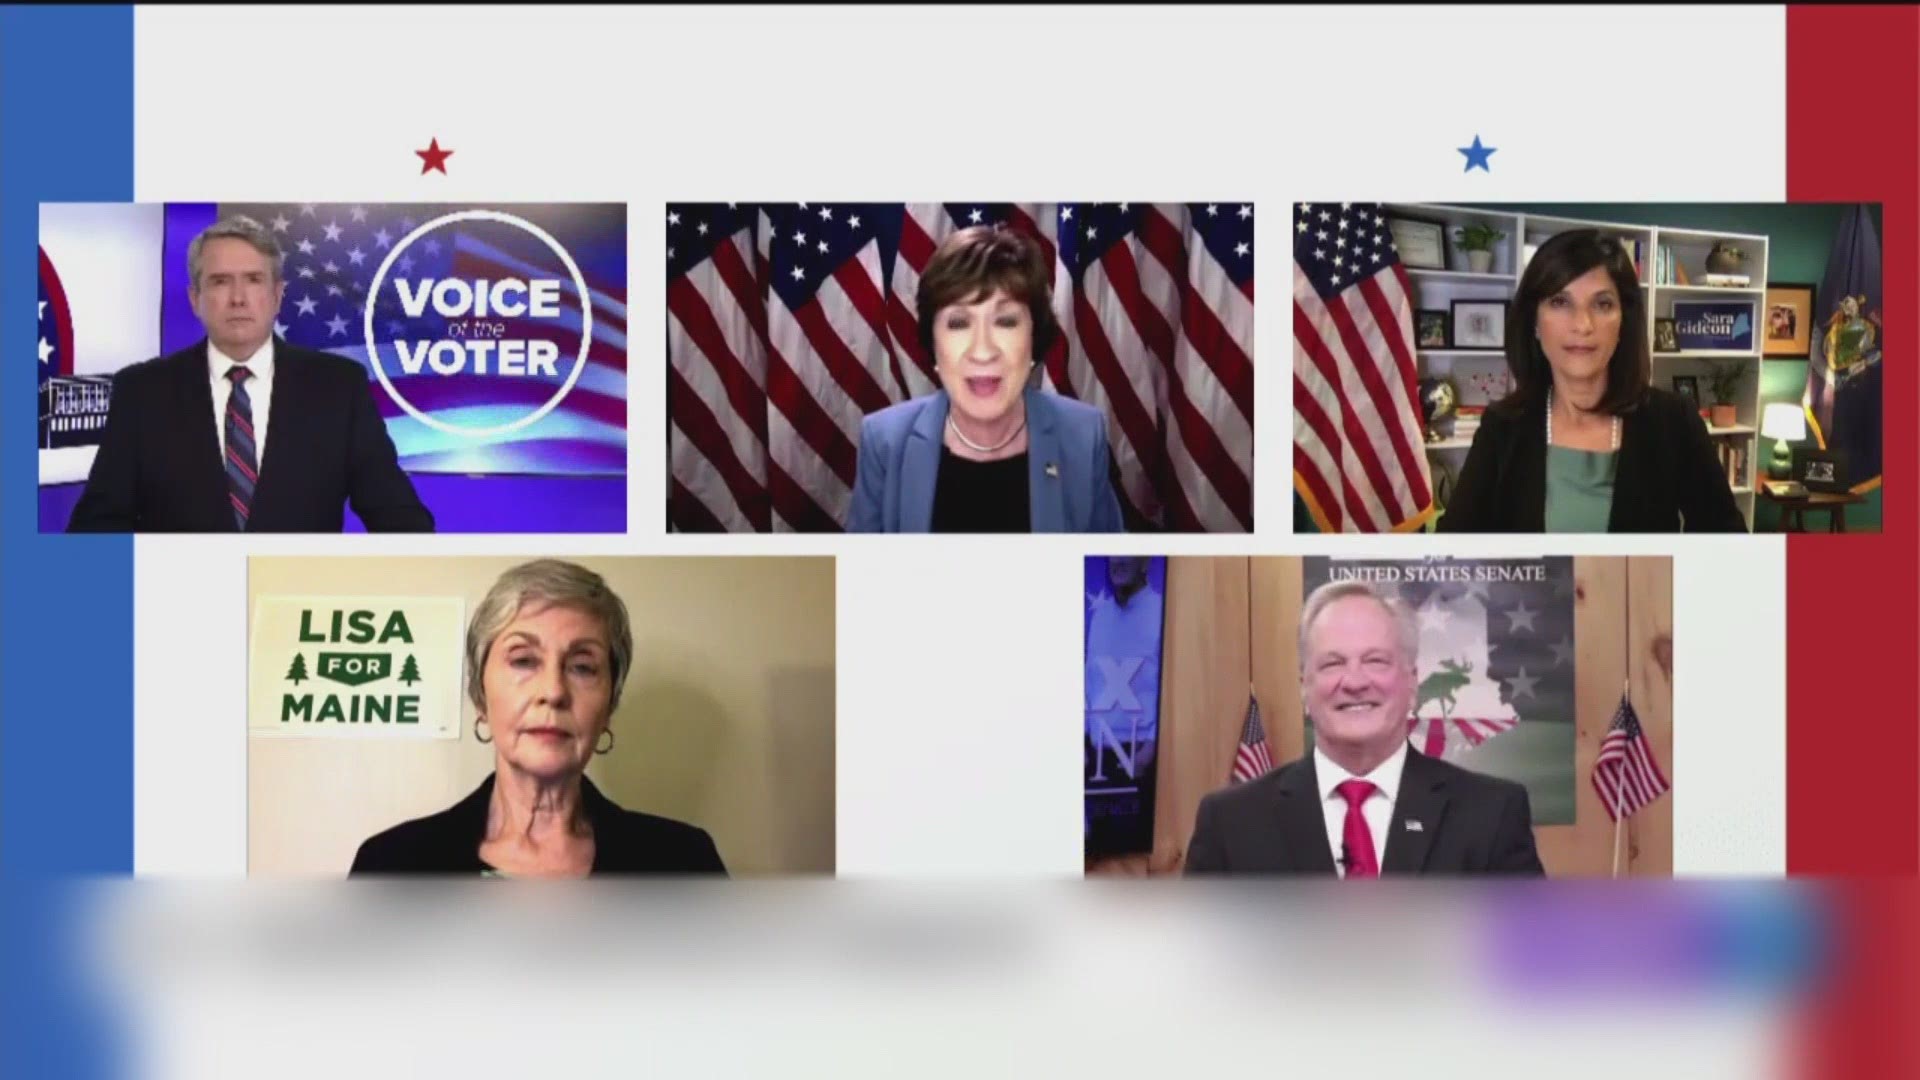 Maine's four candidates for U.S. Senate, Susan Collins, Sara Gideon, Lisa Savage, and Max Linn, faced off in a debate hosted by NEWS CENTER Maine on Thursday.